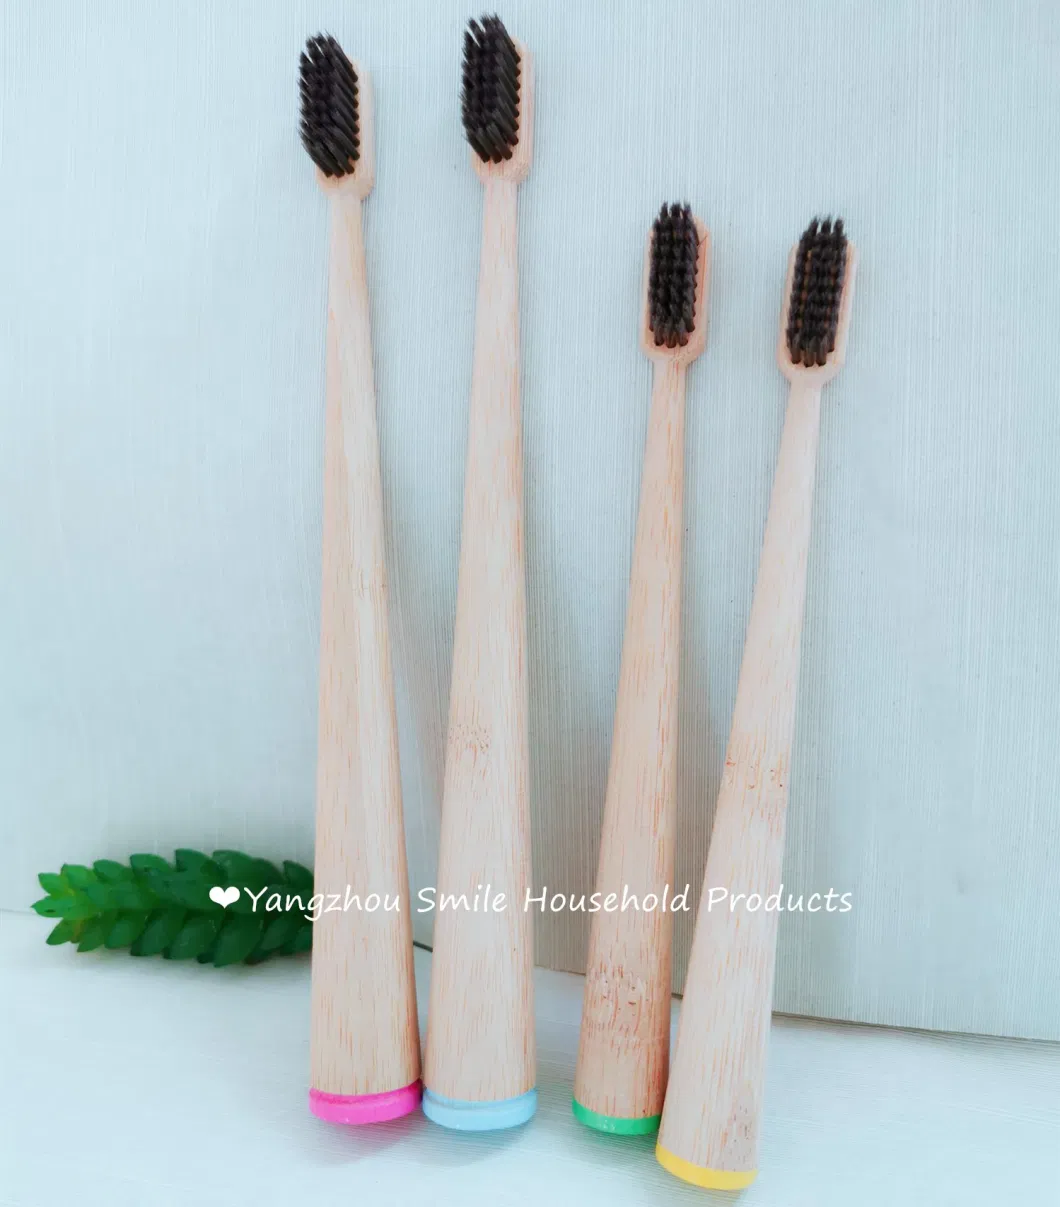 Biodegradable New Active Charcoal Bamboo Toothbrush with Painting